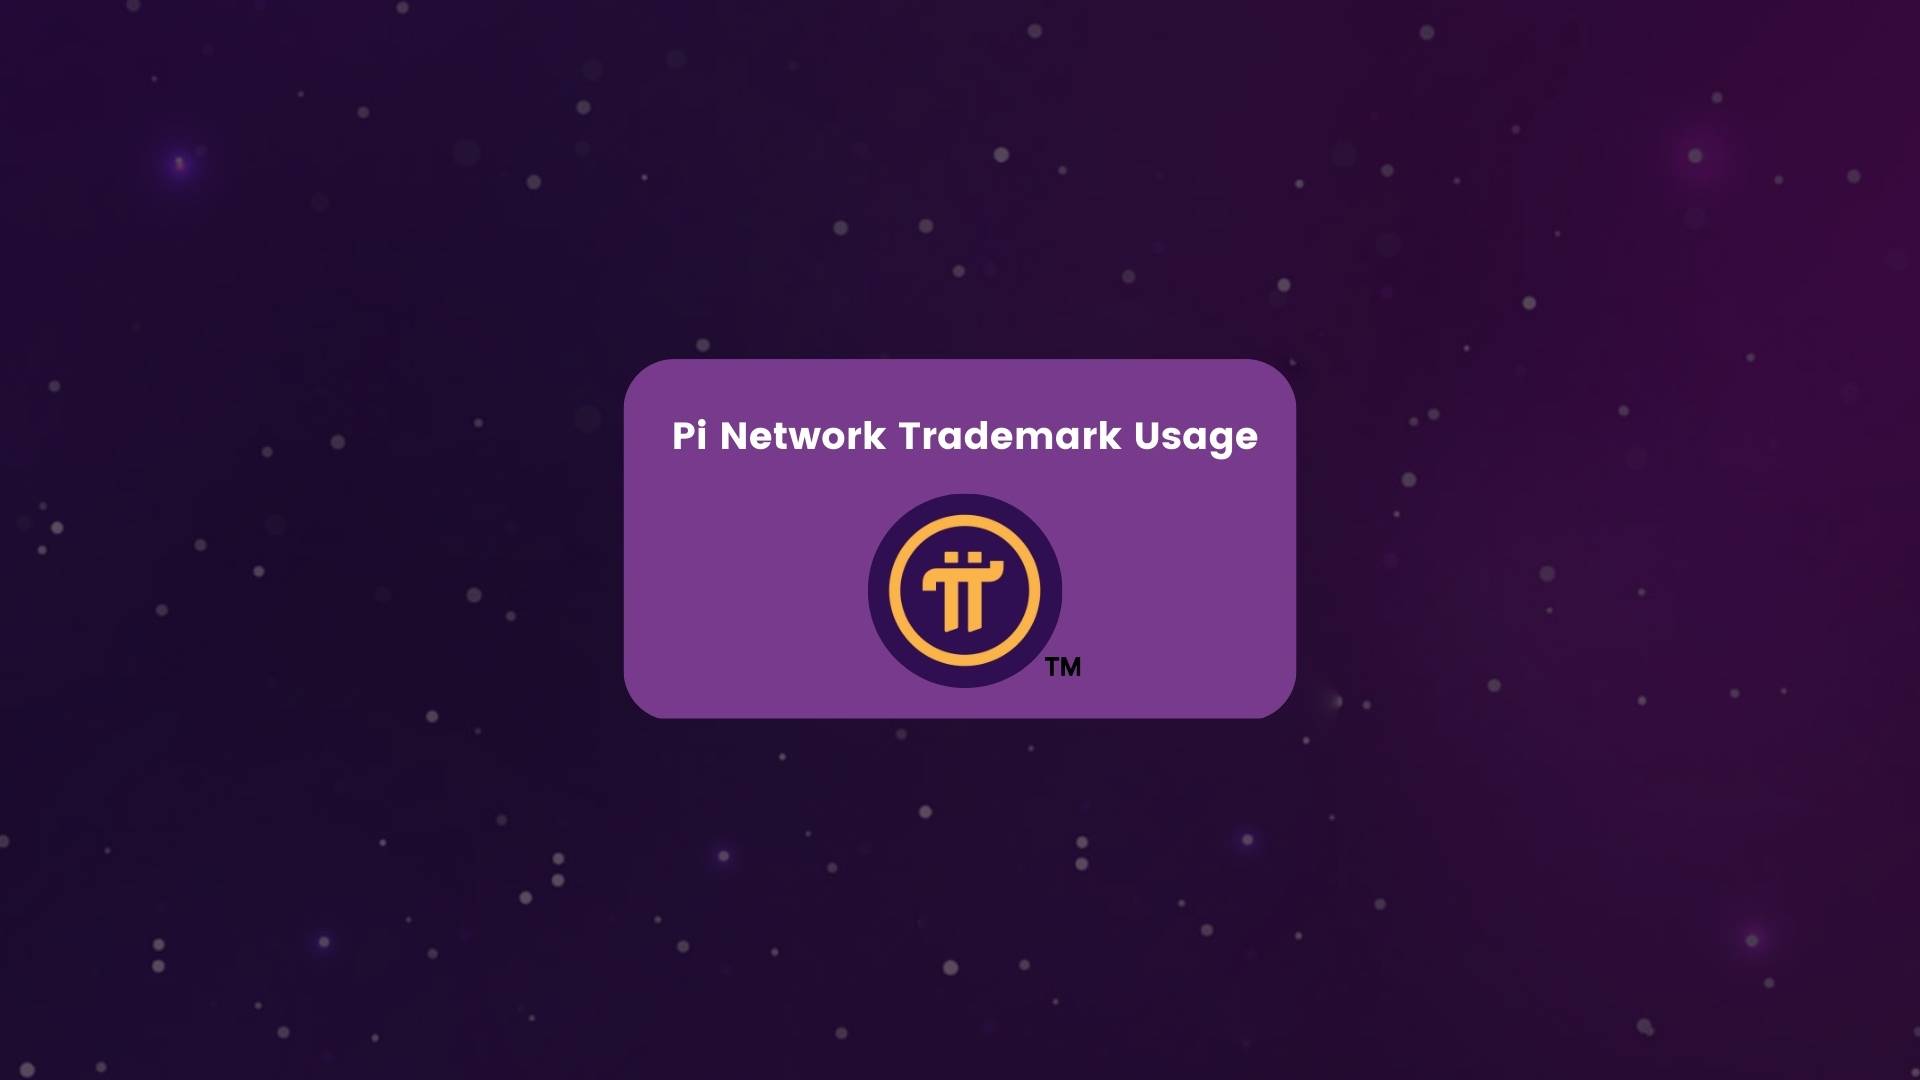 Pi Trademark usage, tips for keeping the community secure